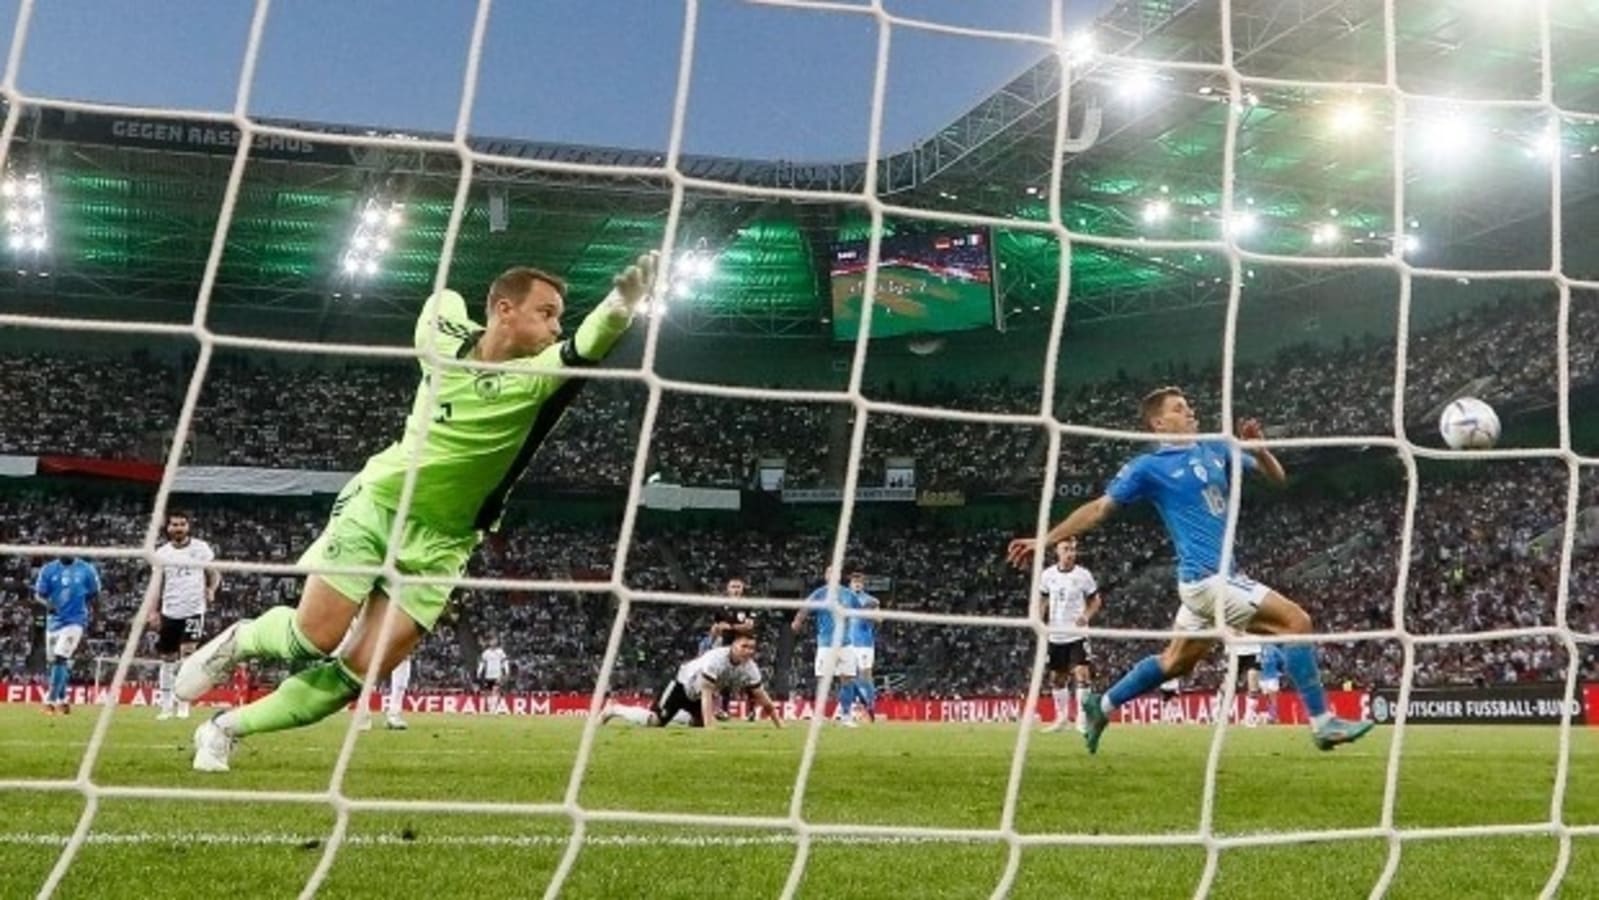 Watch: 36-year-old Manuel Neuer pulls an impossible save as Germany thrash Italy 5-2, video goes viral